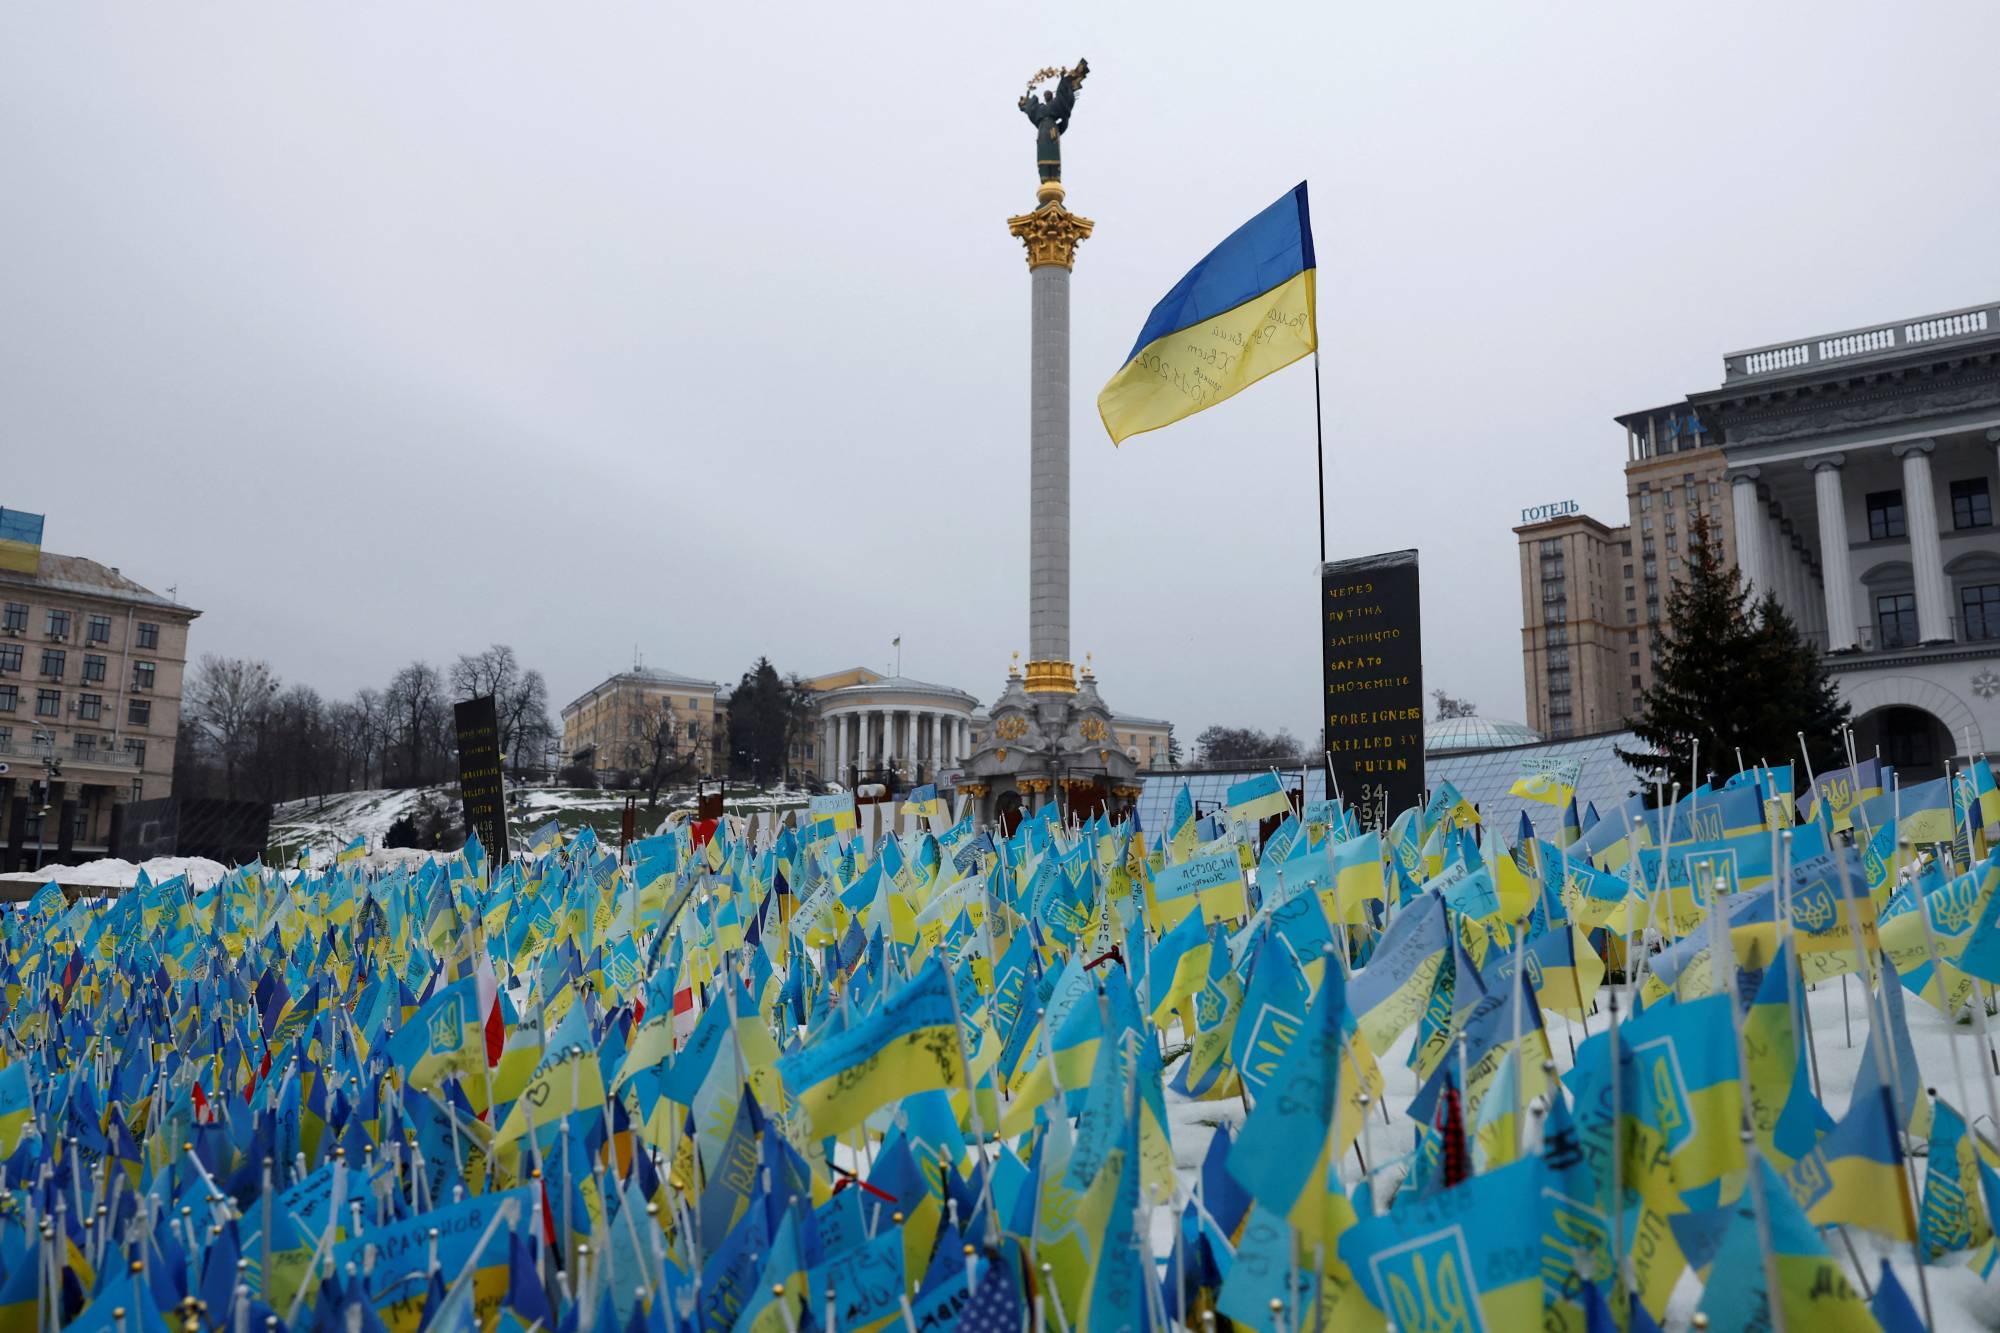 Flags representing fallen soldiers, including foreign soldiers, in Kyiv's Independence Square | REUTERS